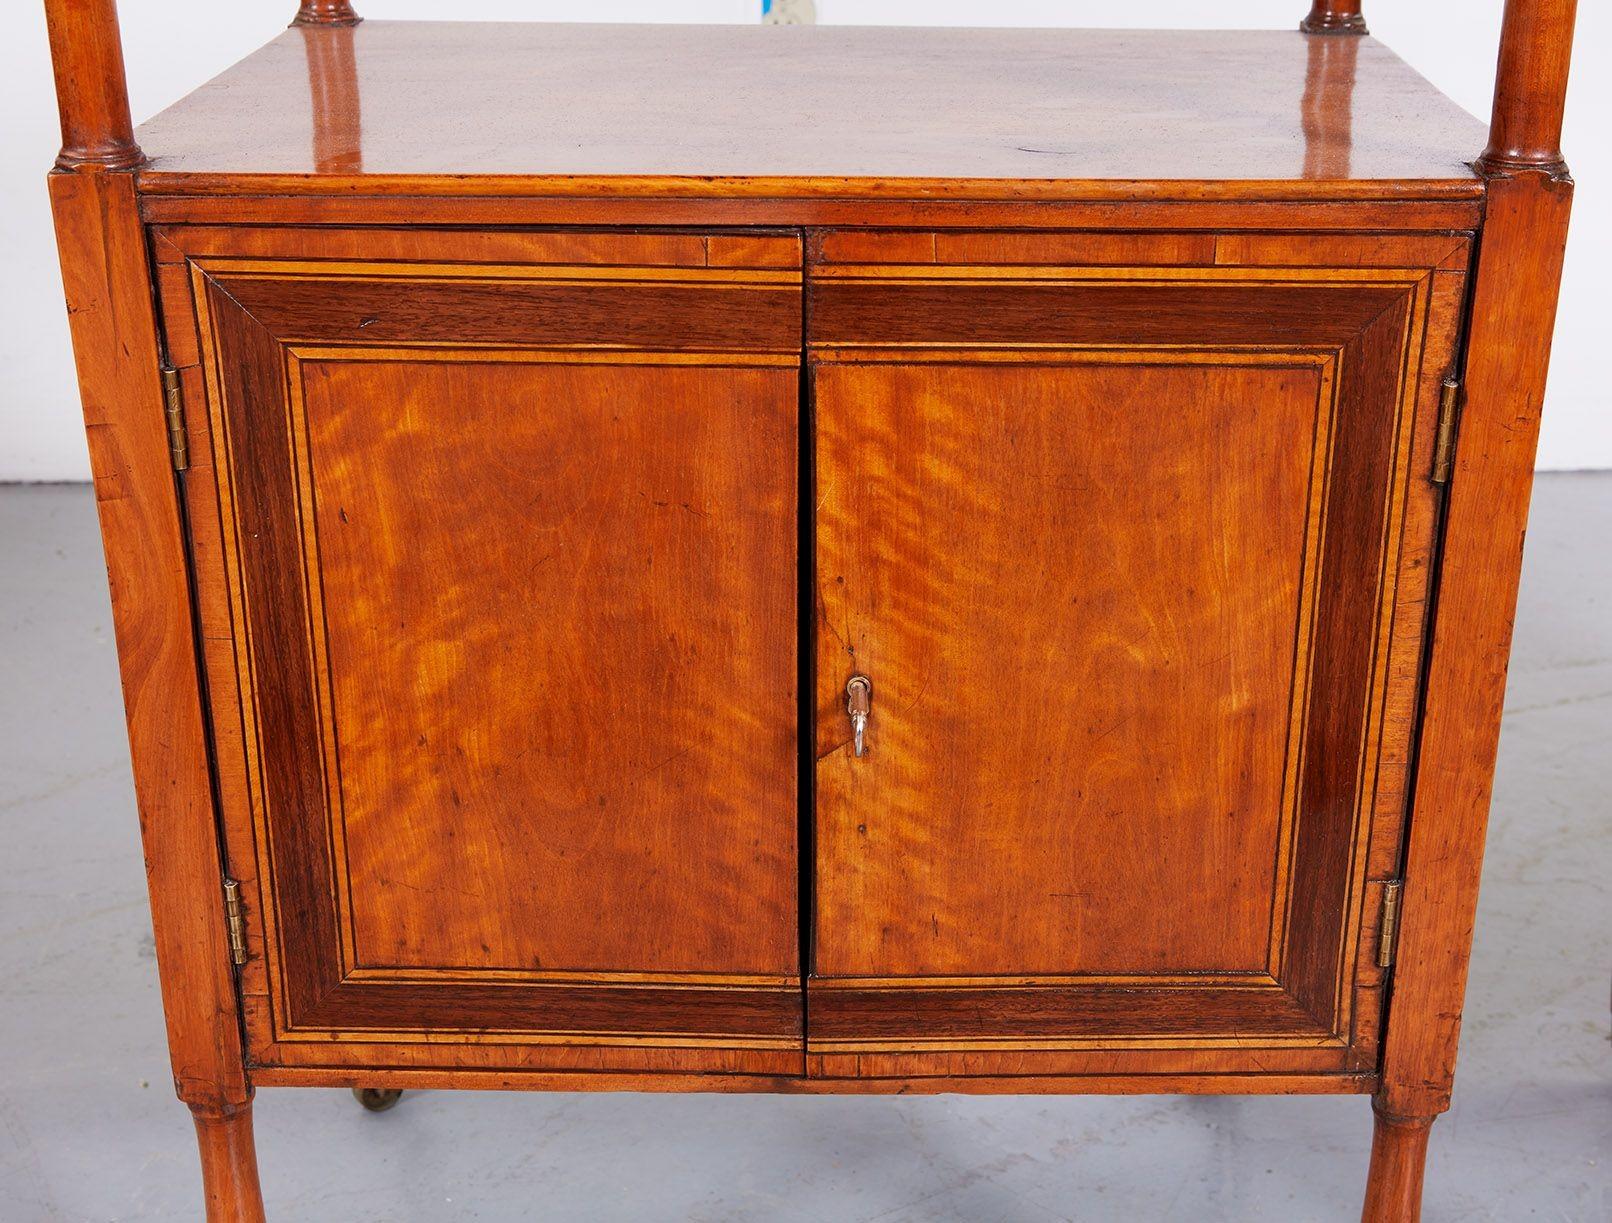 A Rare Pair of 18th c. English Satinwood Etageres For Sale 4